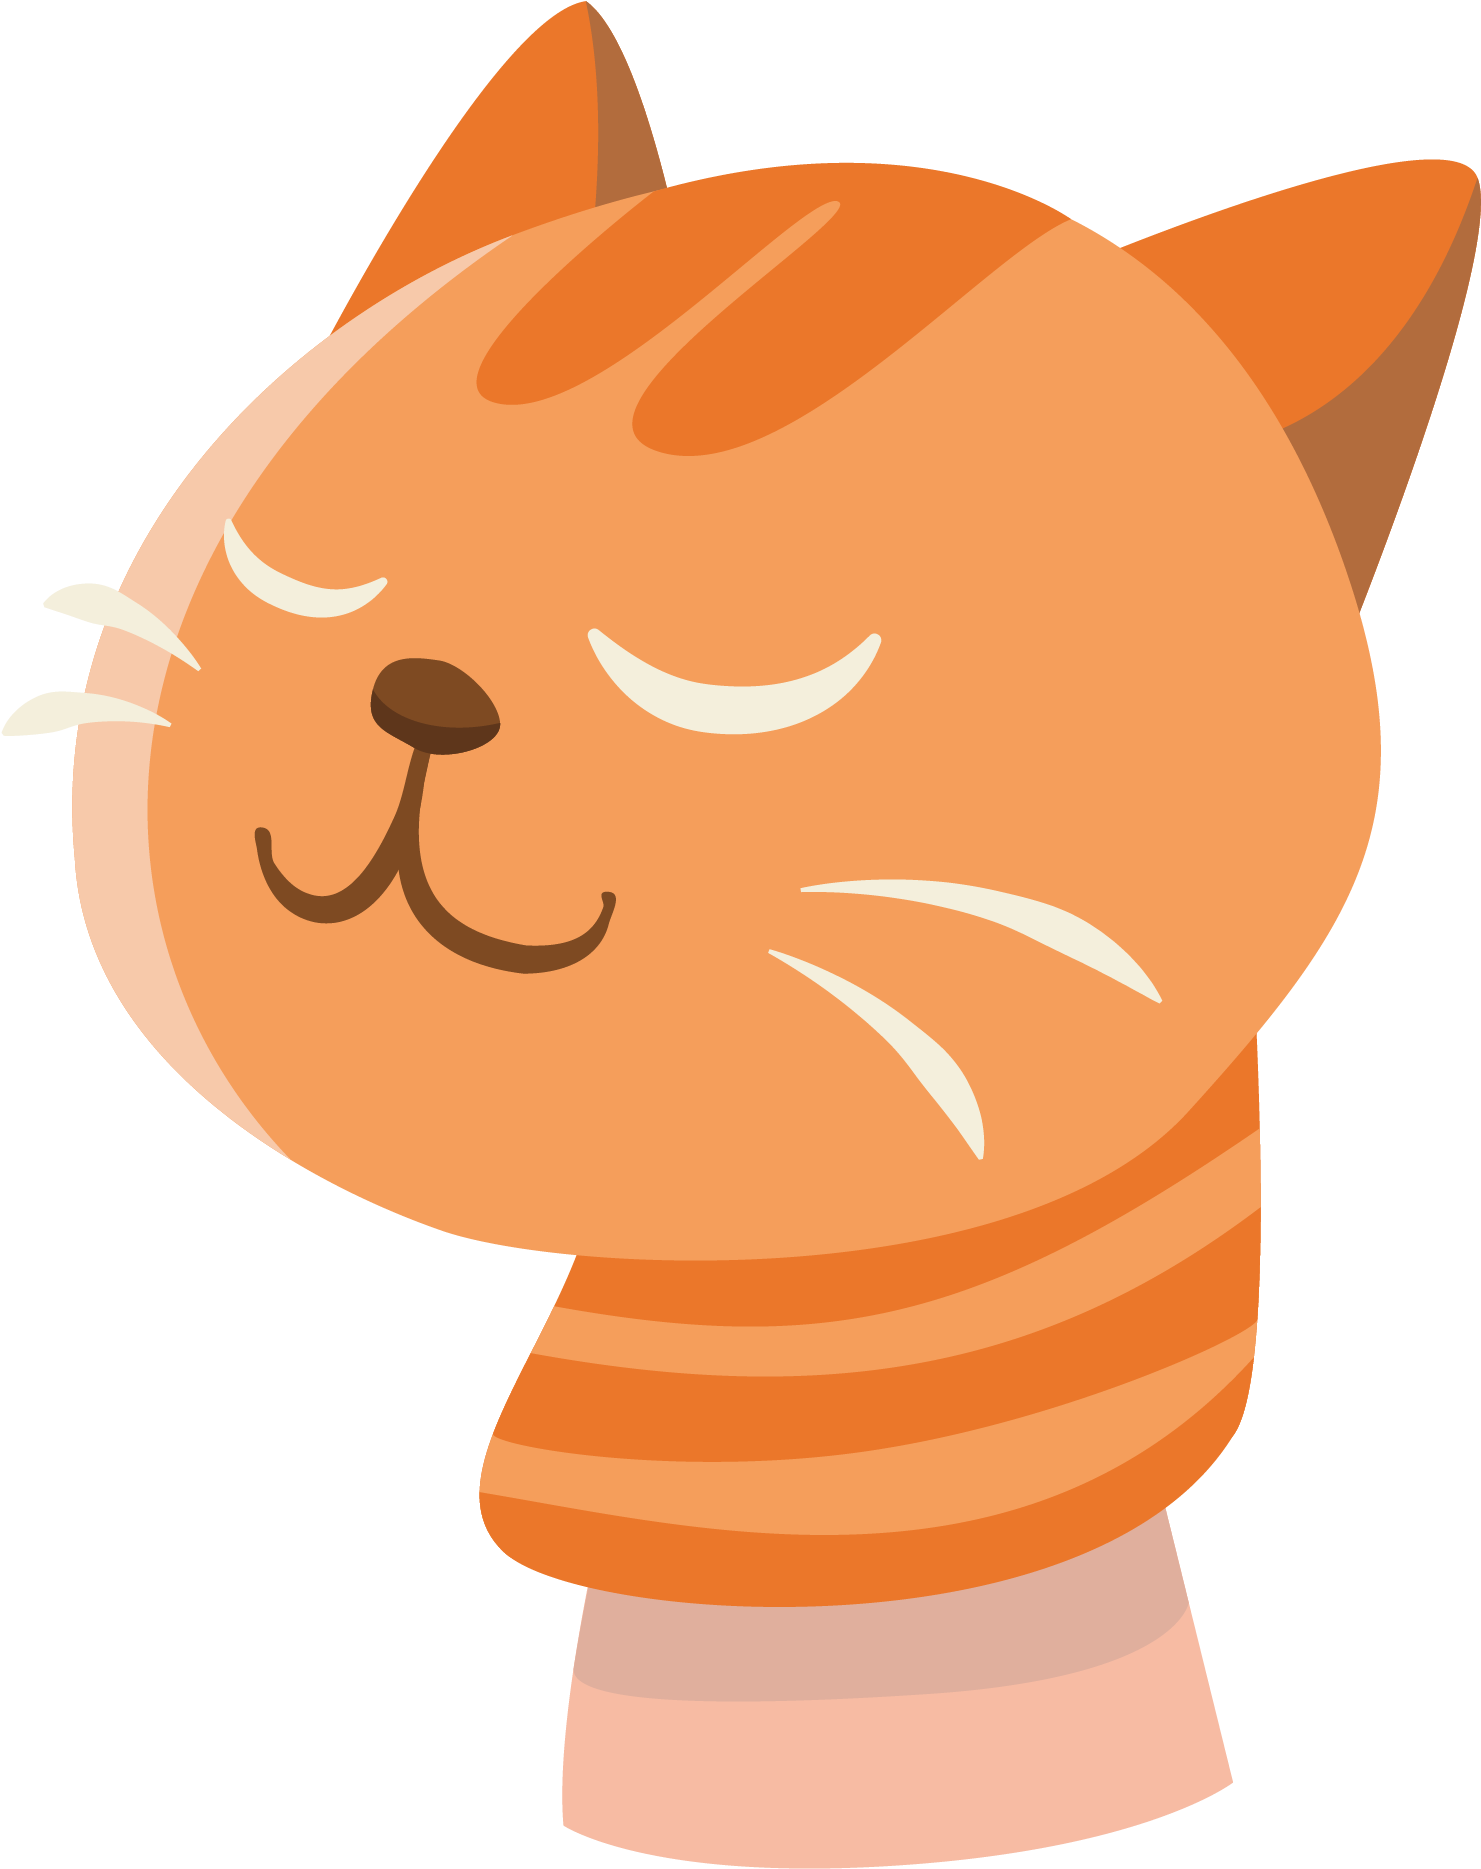 Today Is National Cat Day - Buncee (2084x2084)